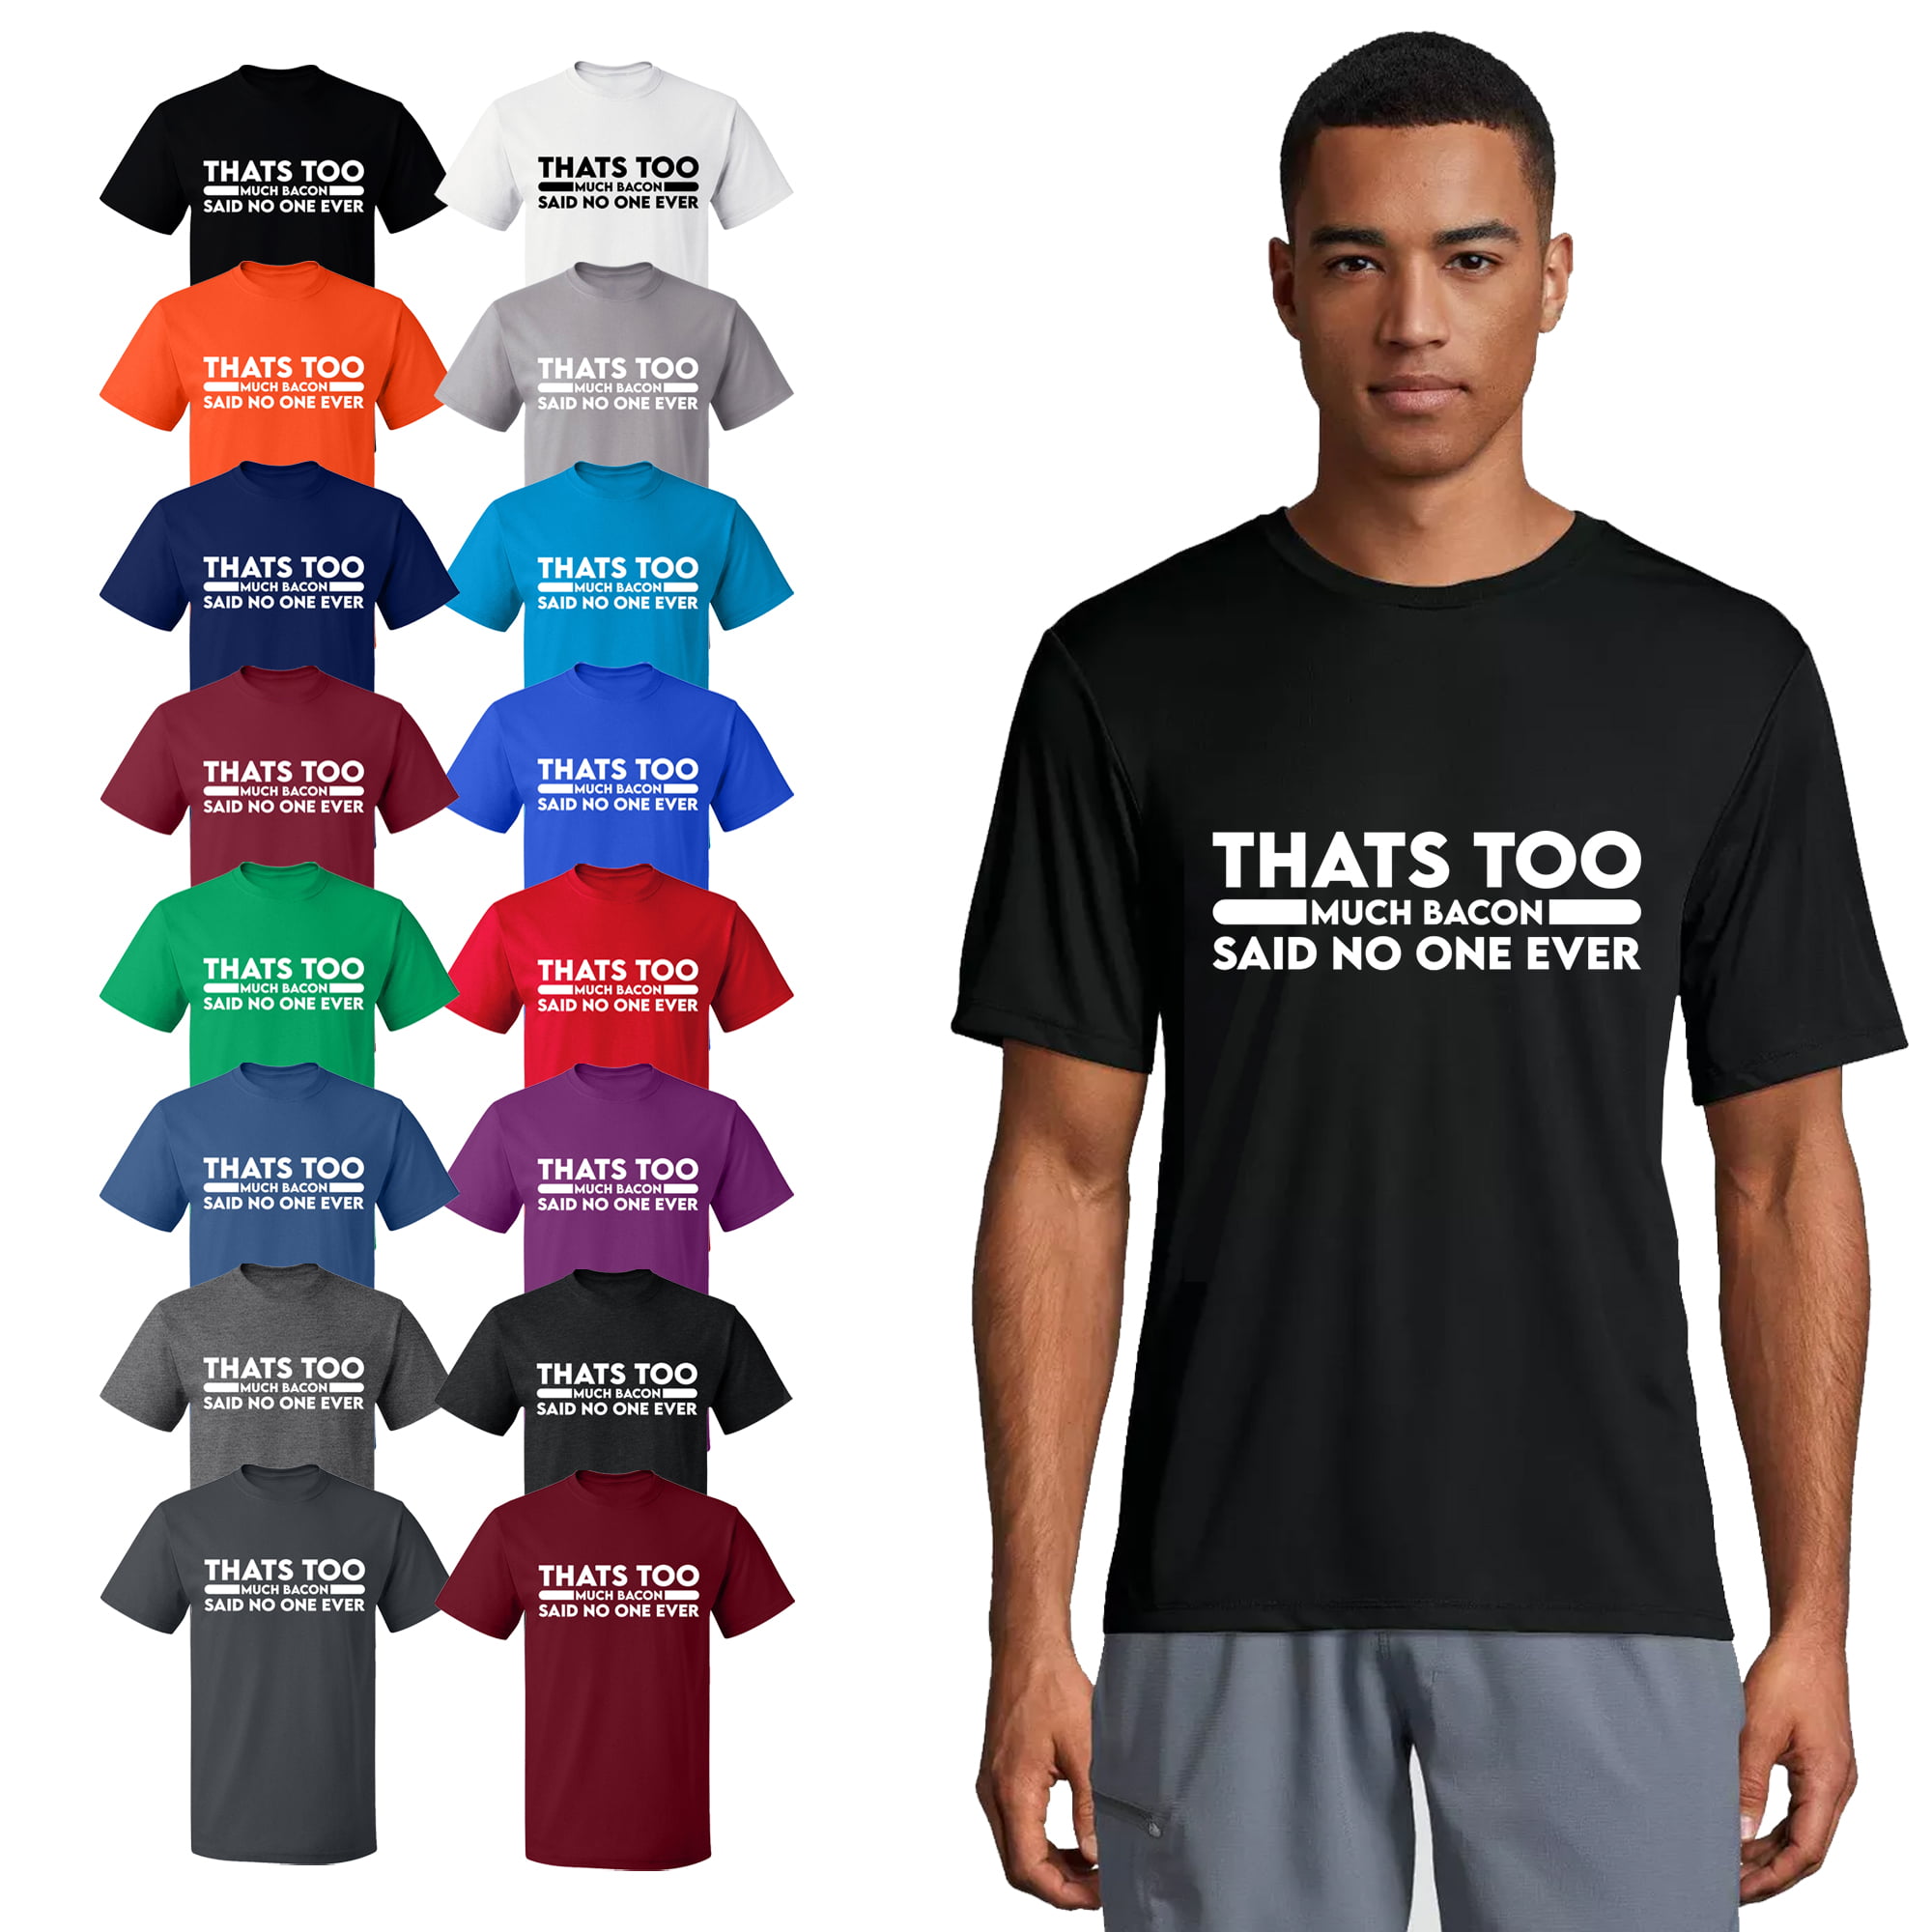 OXI T-Shirt - Thats Too Much Bacon, Basic Casual T-Shirt for Men's